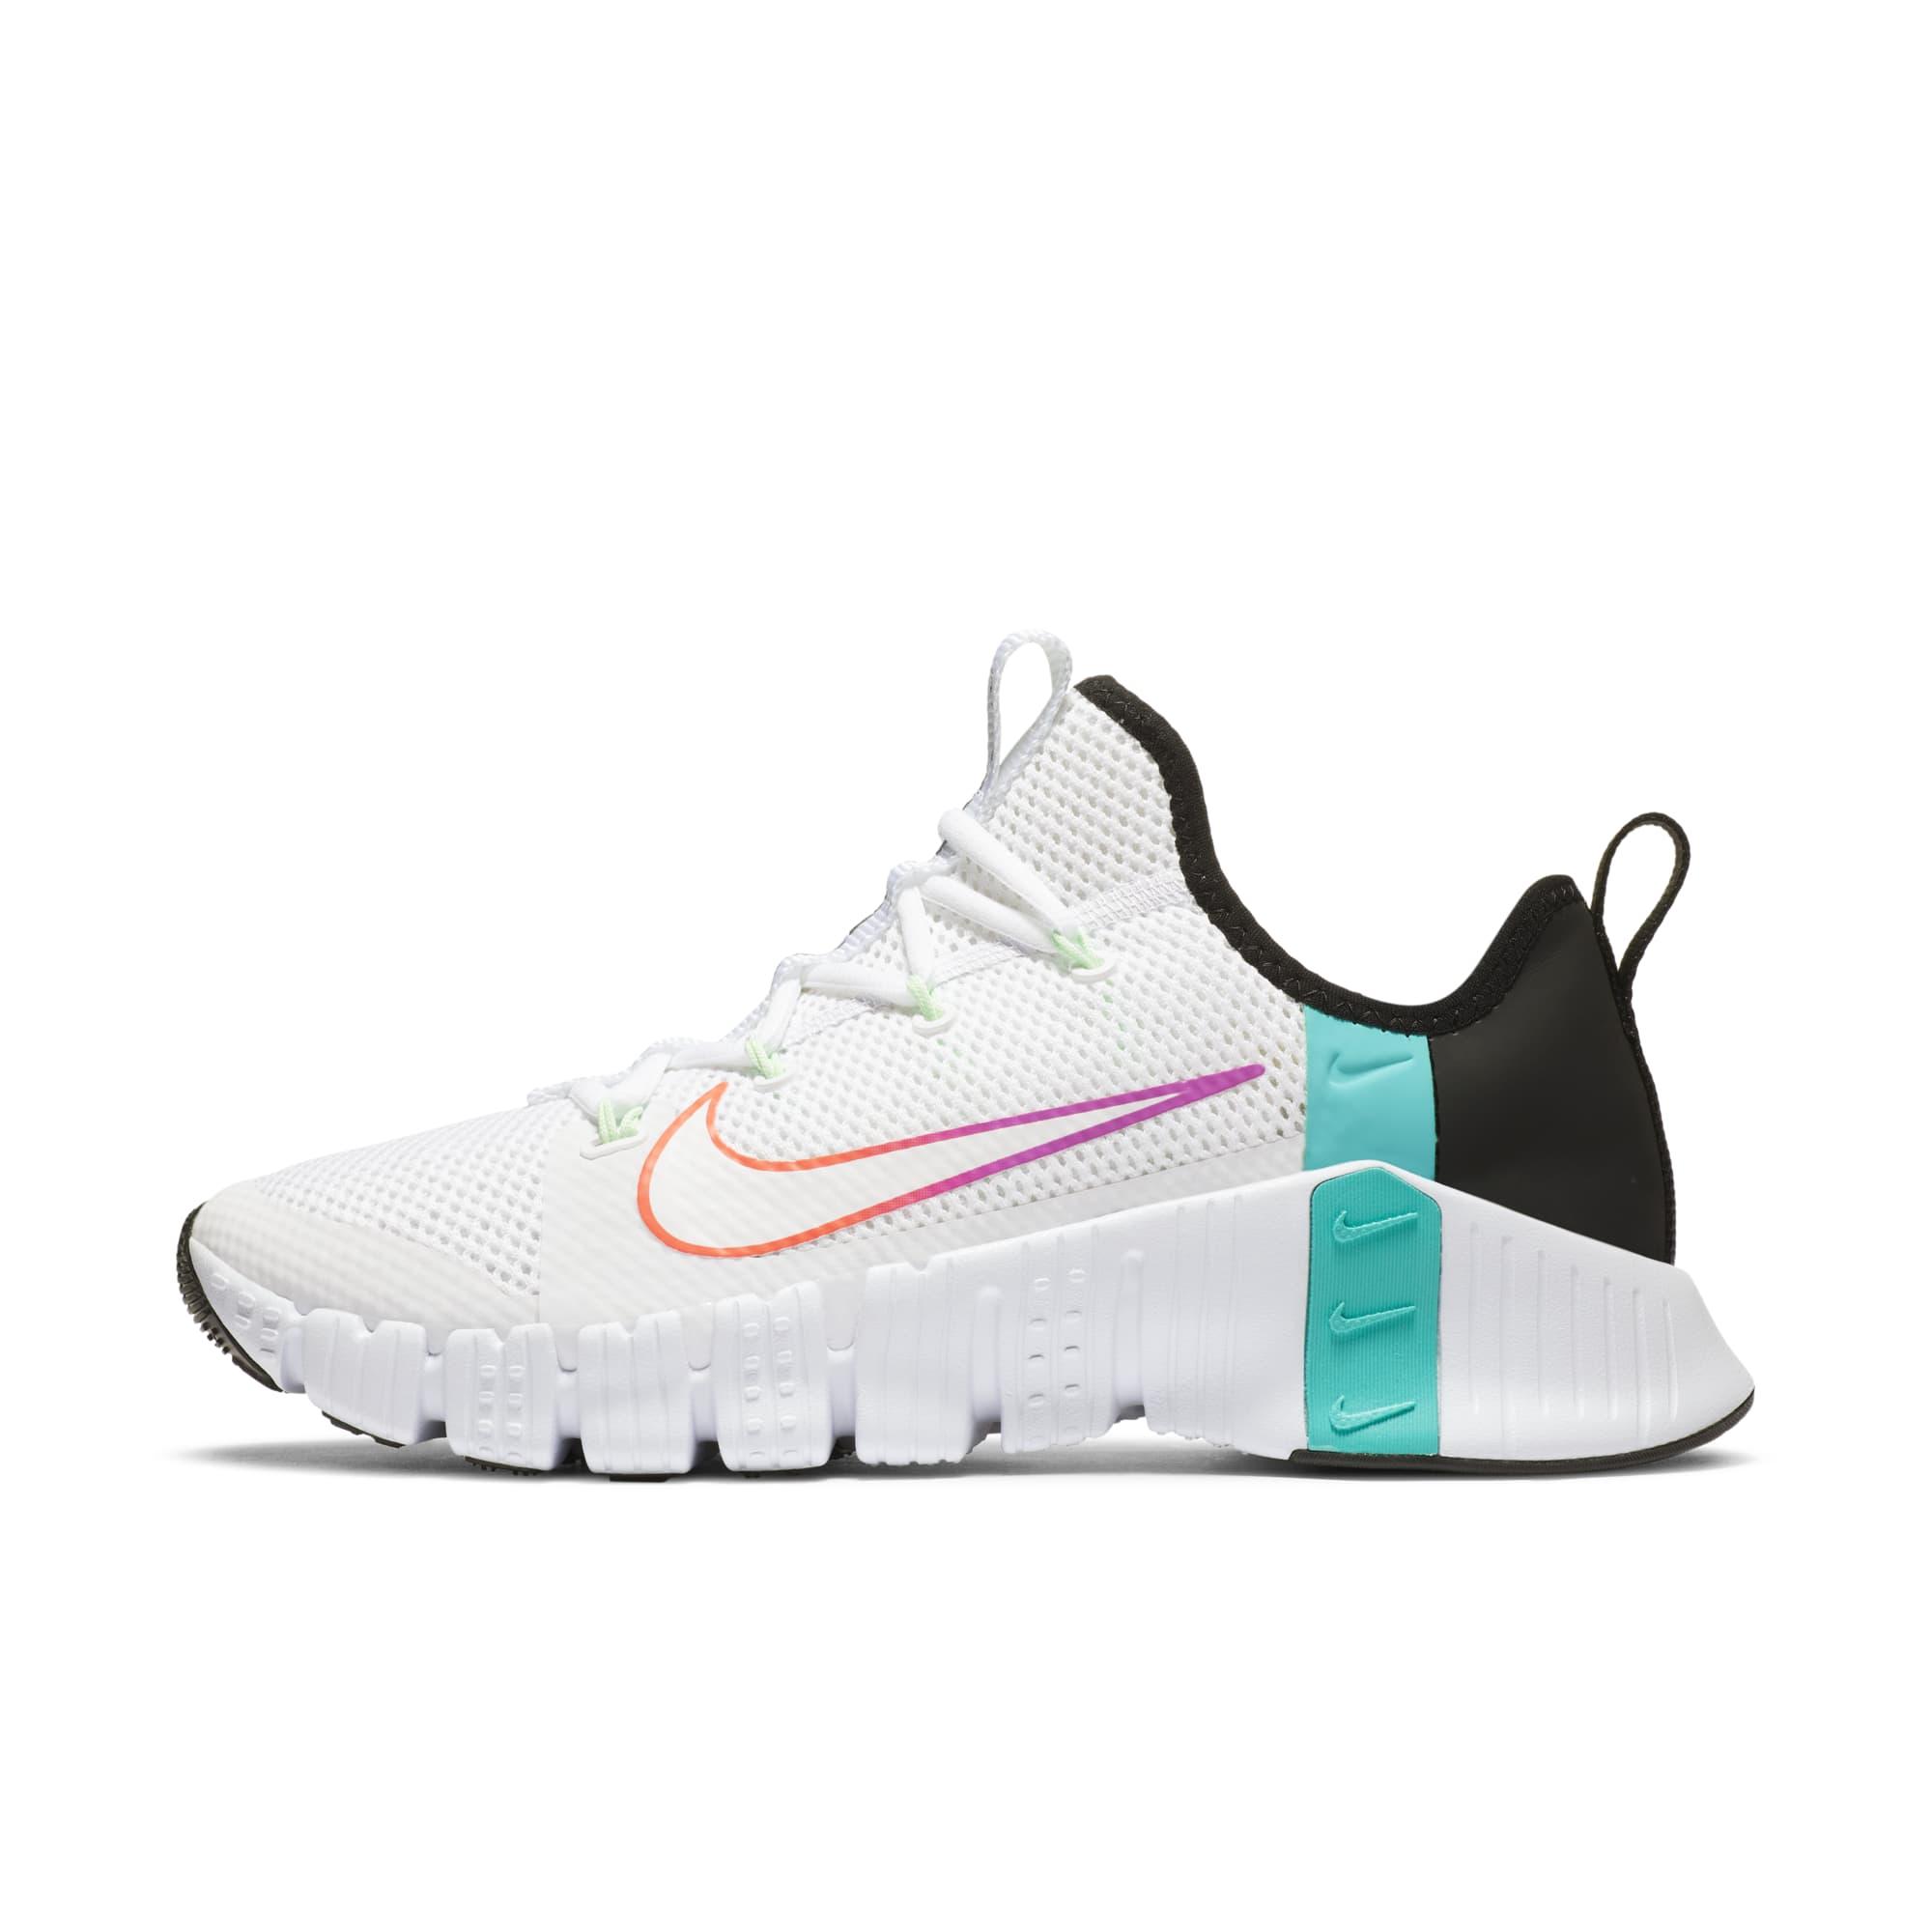 Nike Free Metcon 3 Training Shoes in White | Lyst